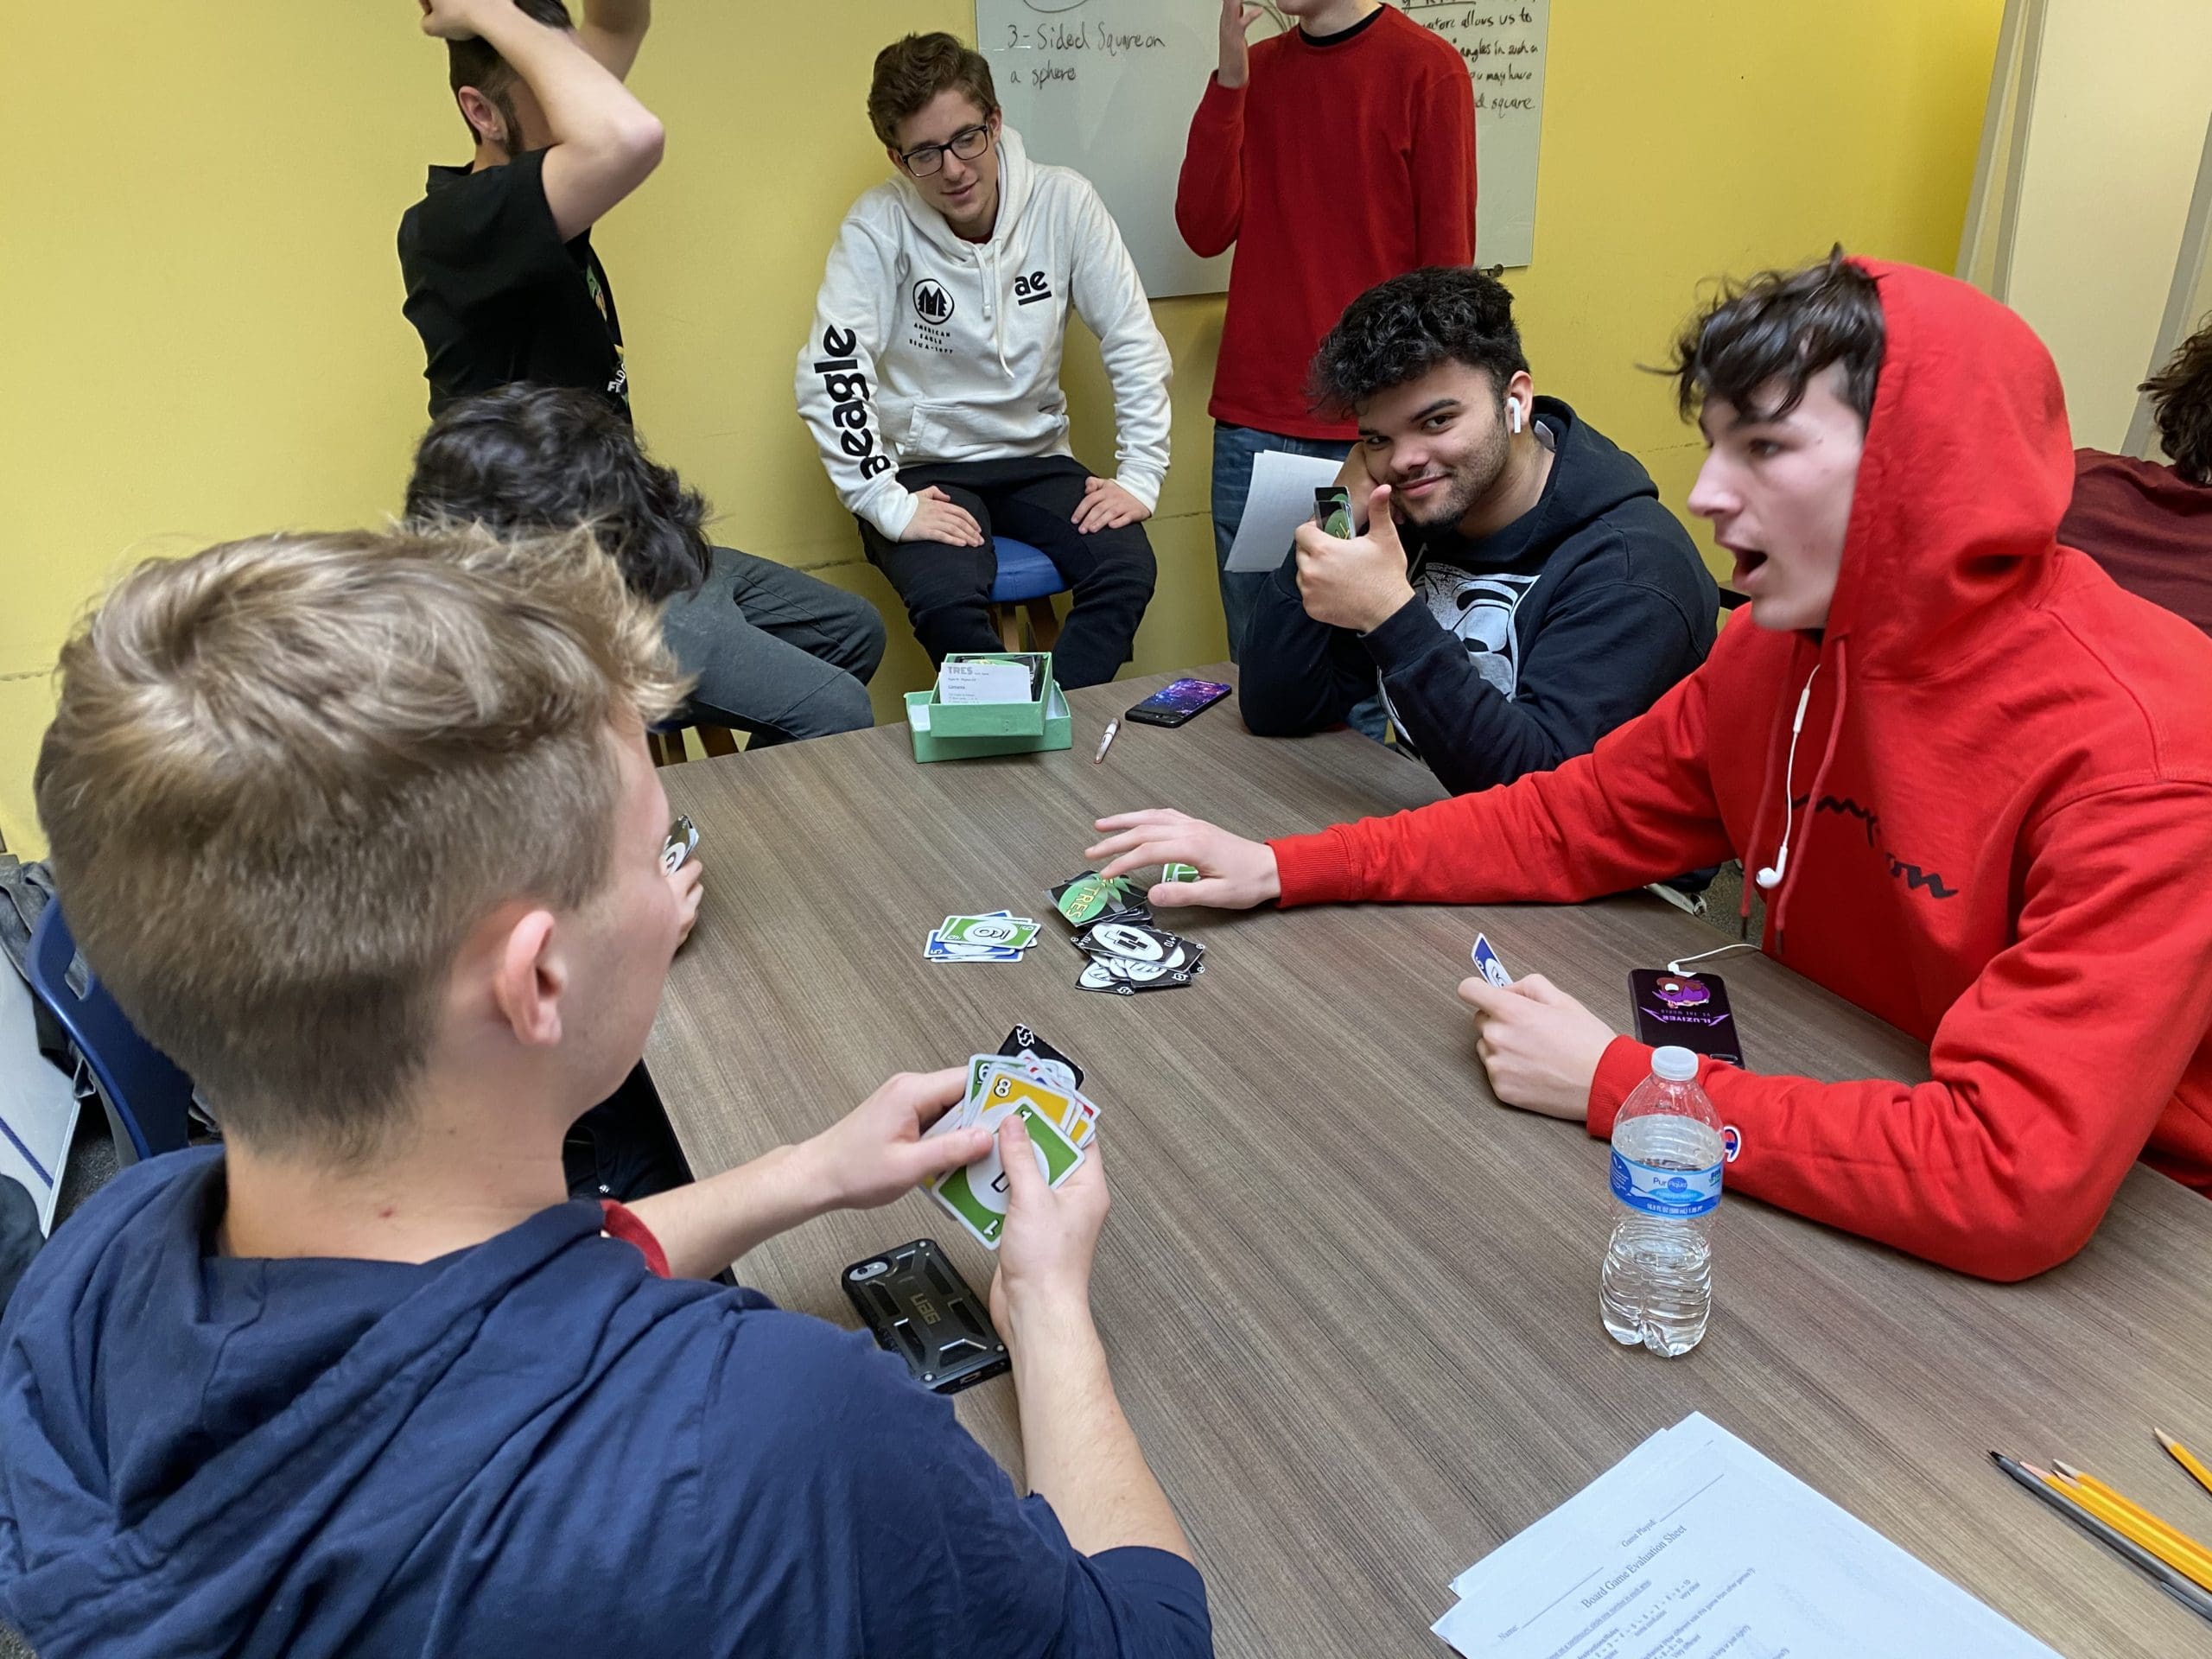 students playing a game